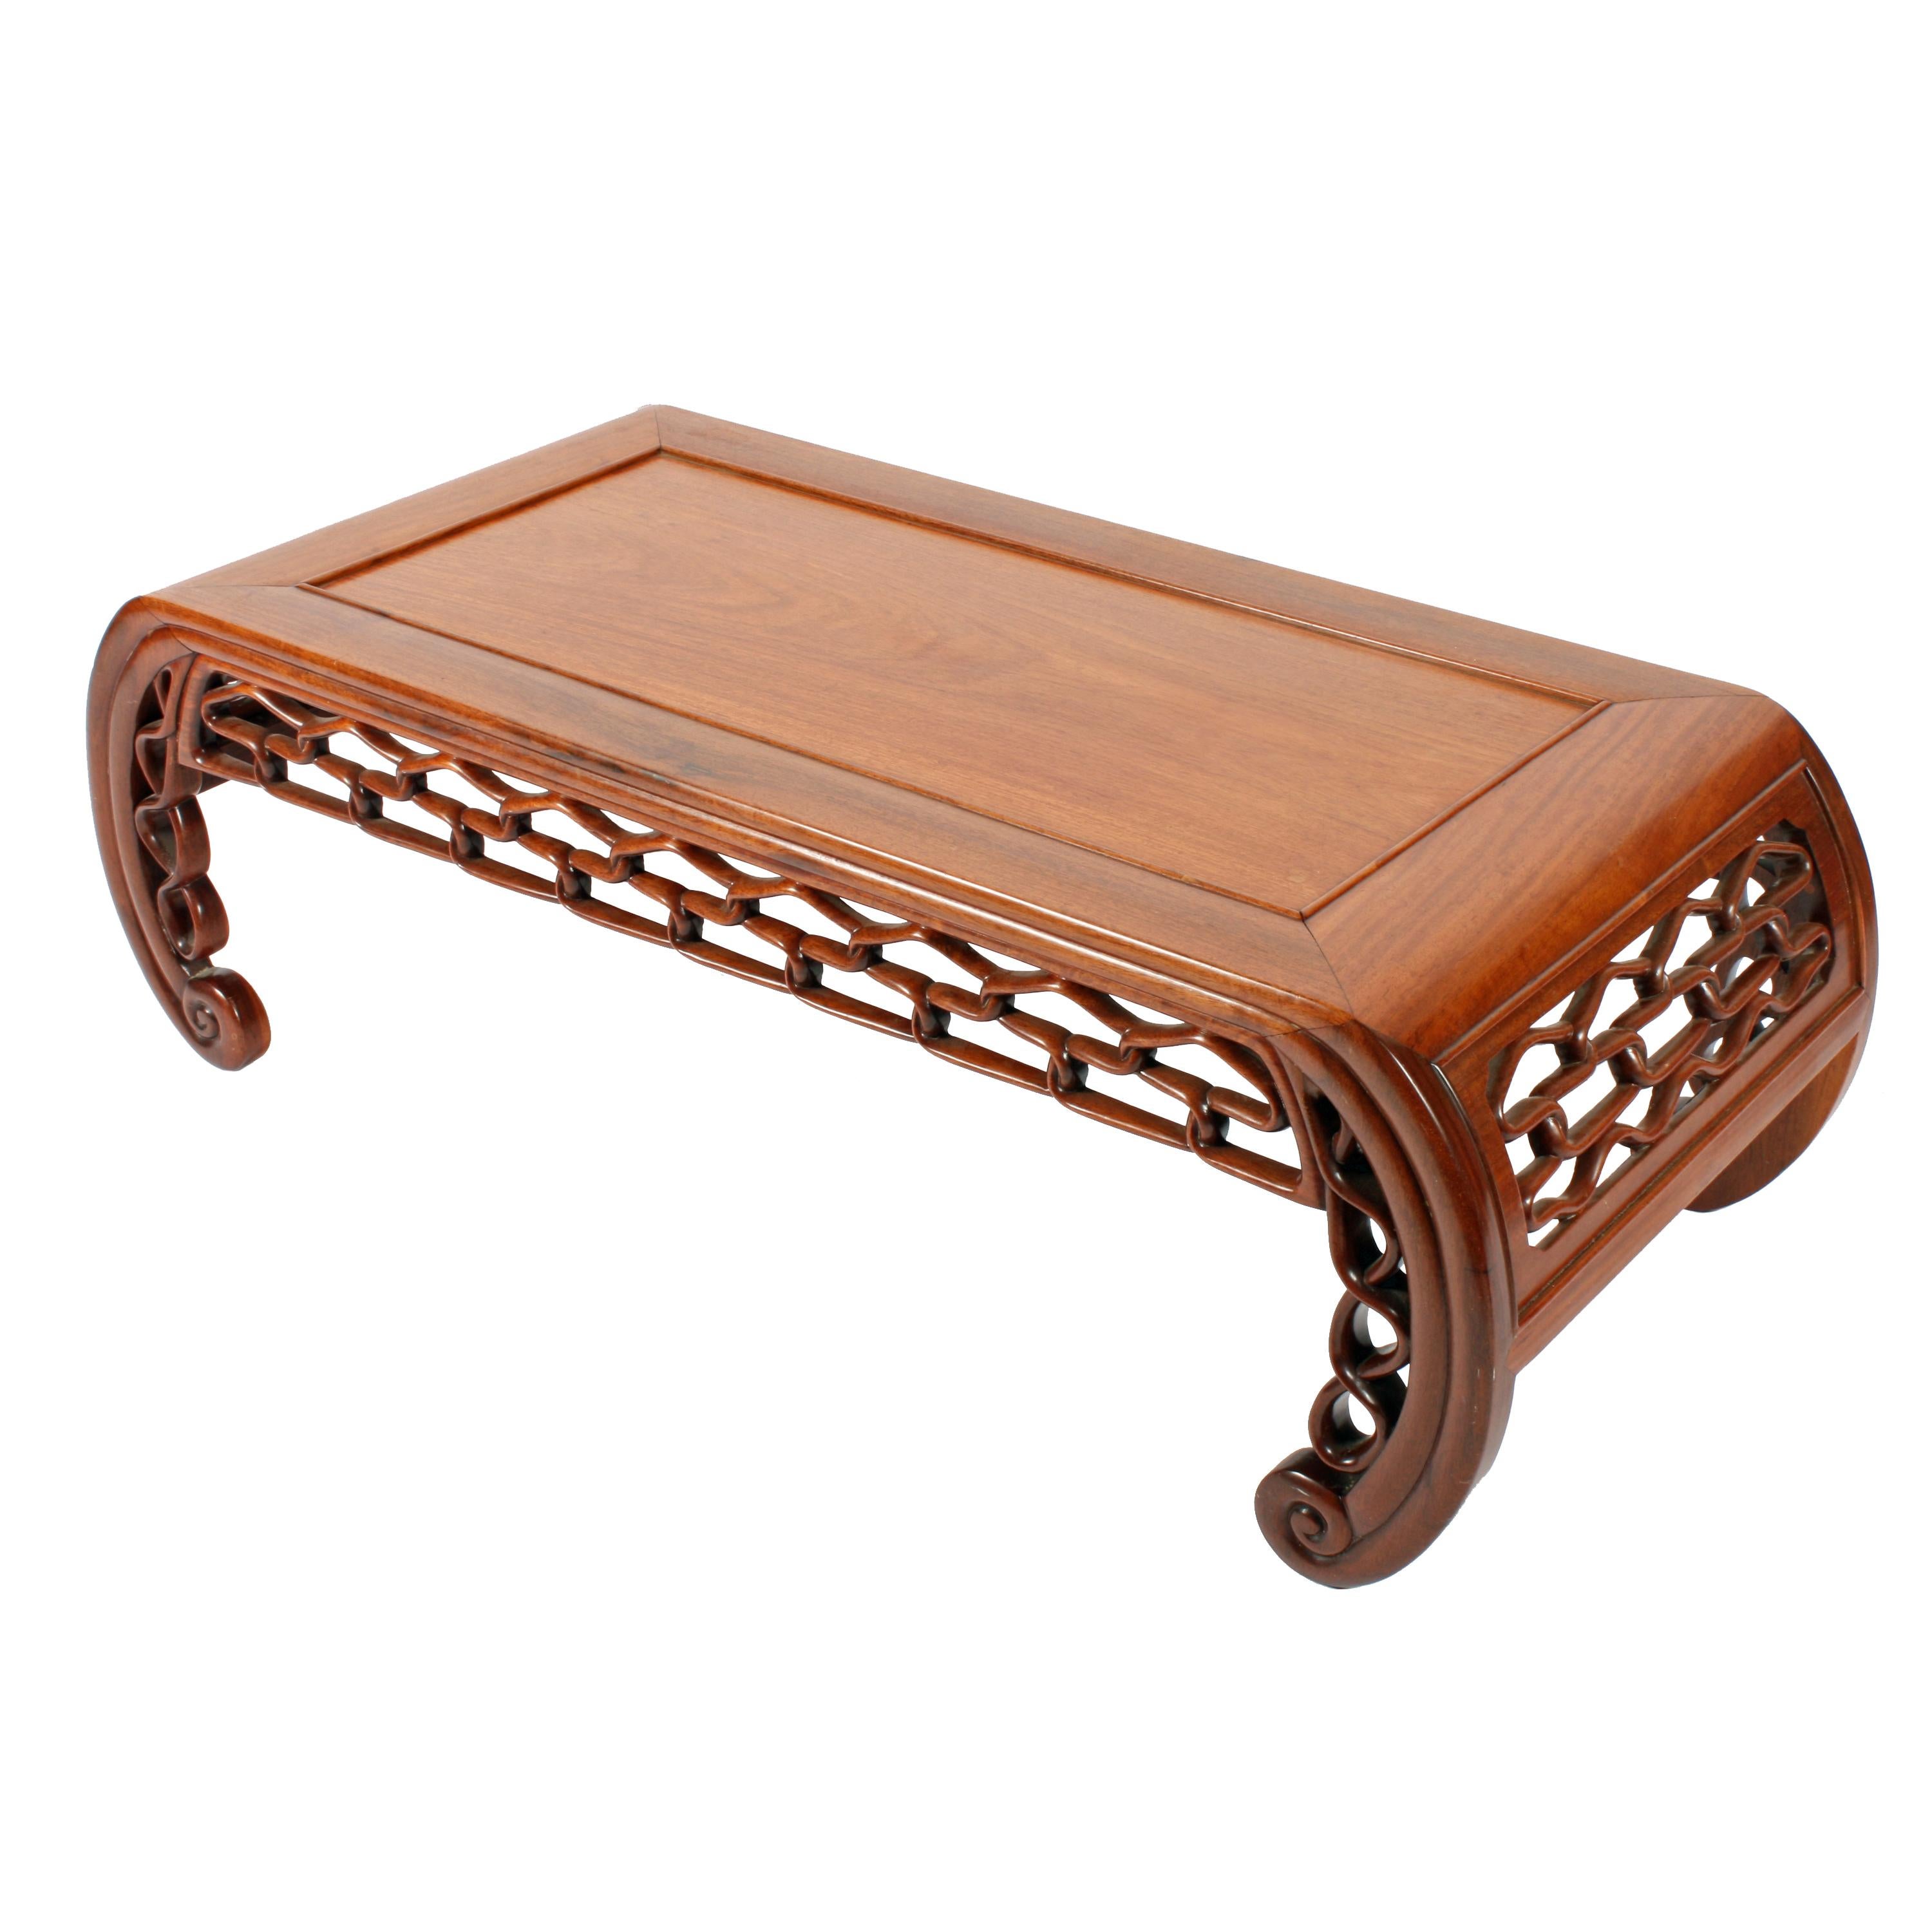 An early 20th century Chinese carved walnut opium or coffee table.

The table has a recessed single panel top with a moulded edge and the frame curves under at each end into legs with a scroll toe.

The frieze in-between the legs and at the